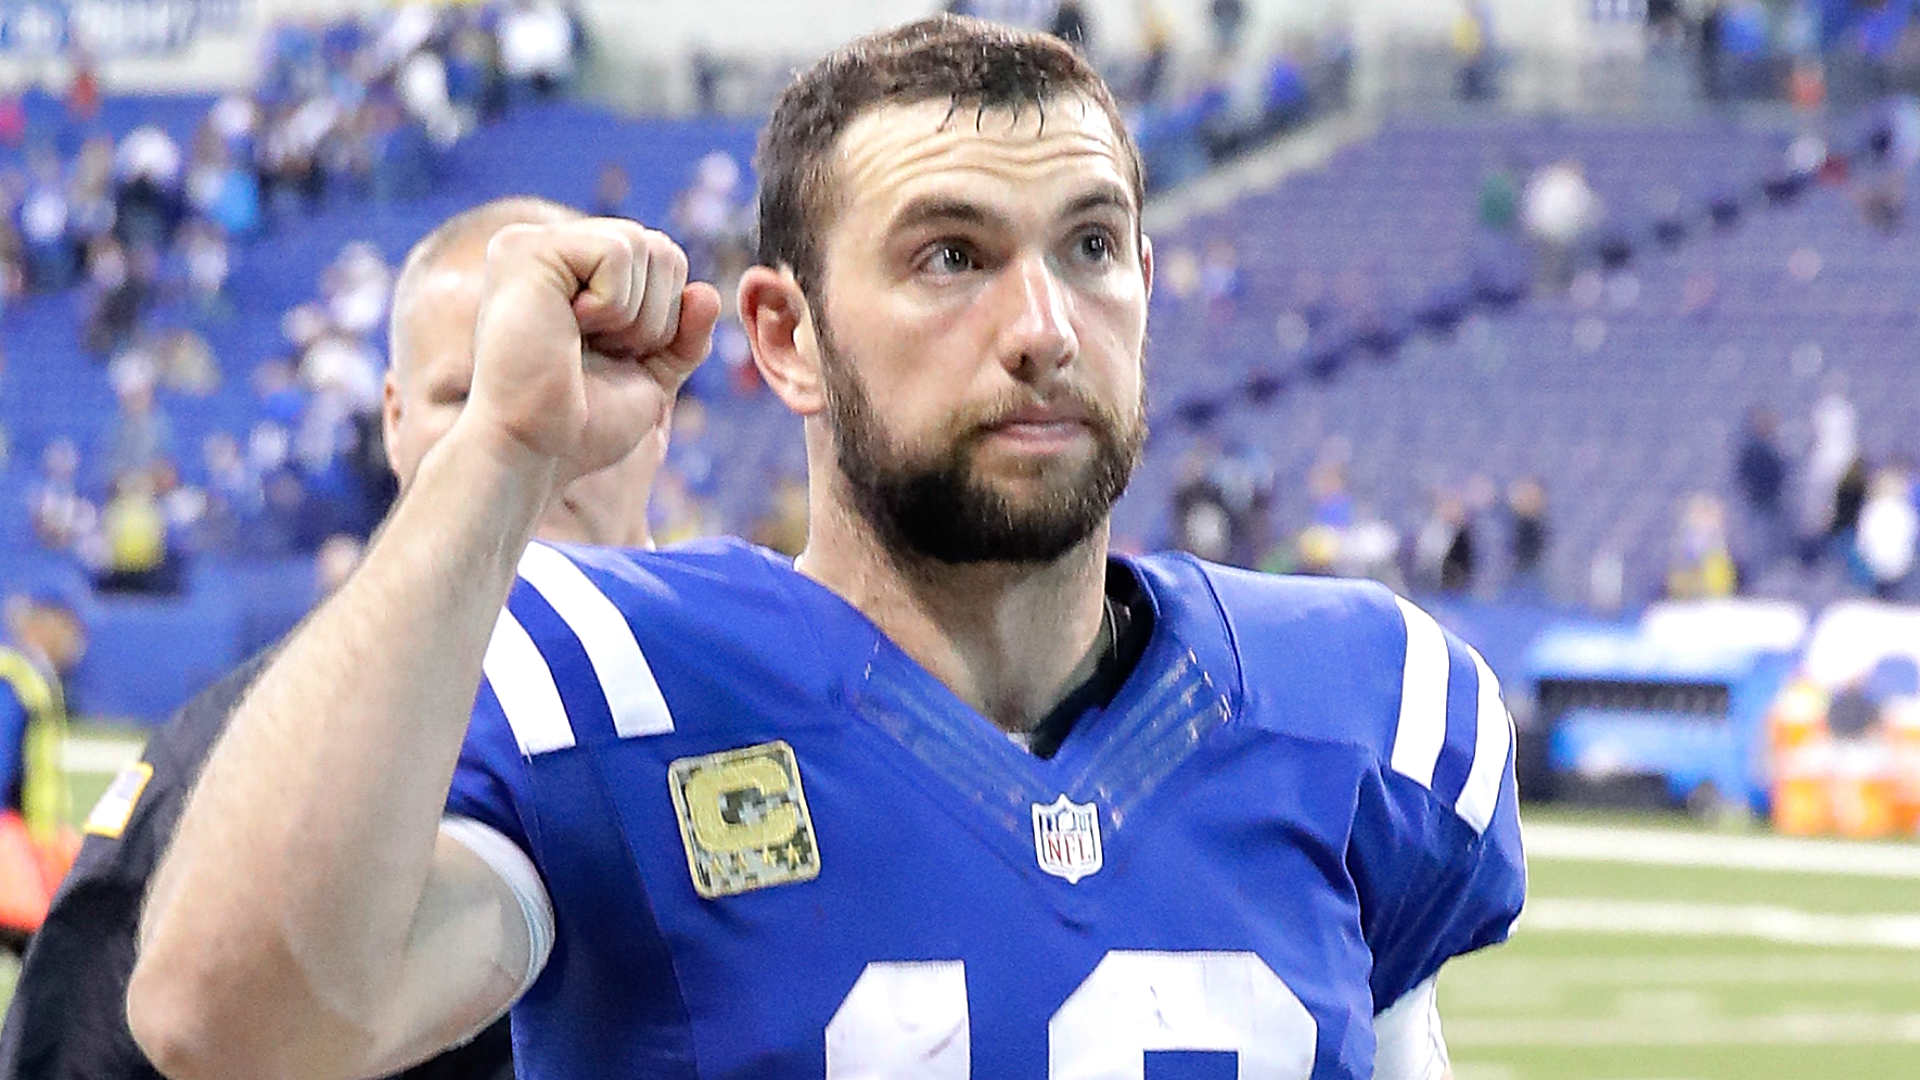 Quarterback Andrew Luck's injury issues are causing worries for the Indianapolis Colts.